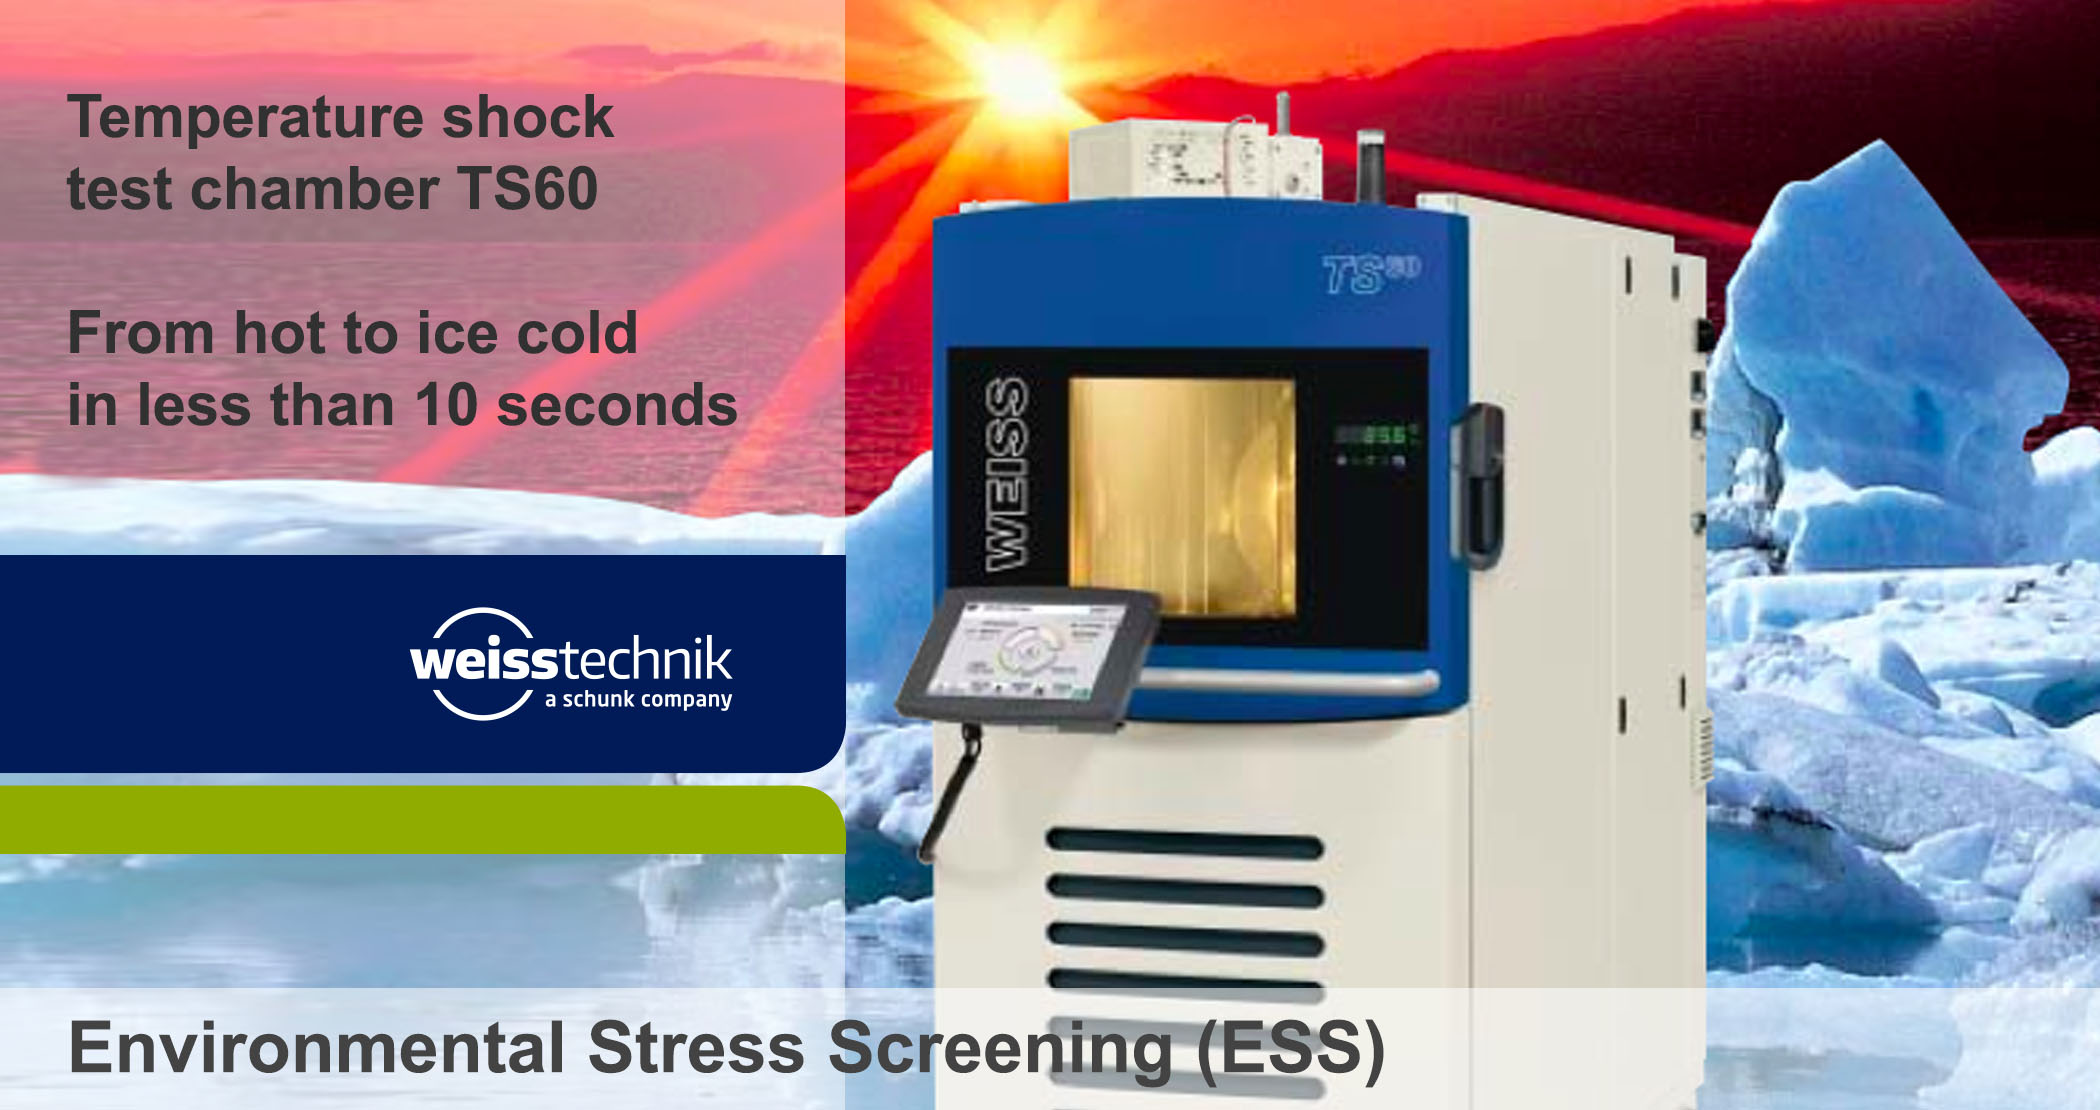 TS60, ESS, temperature shock test chambers